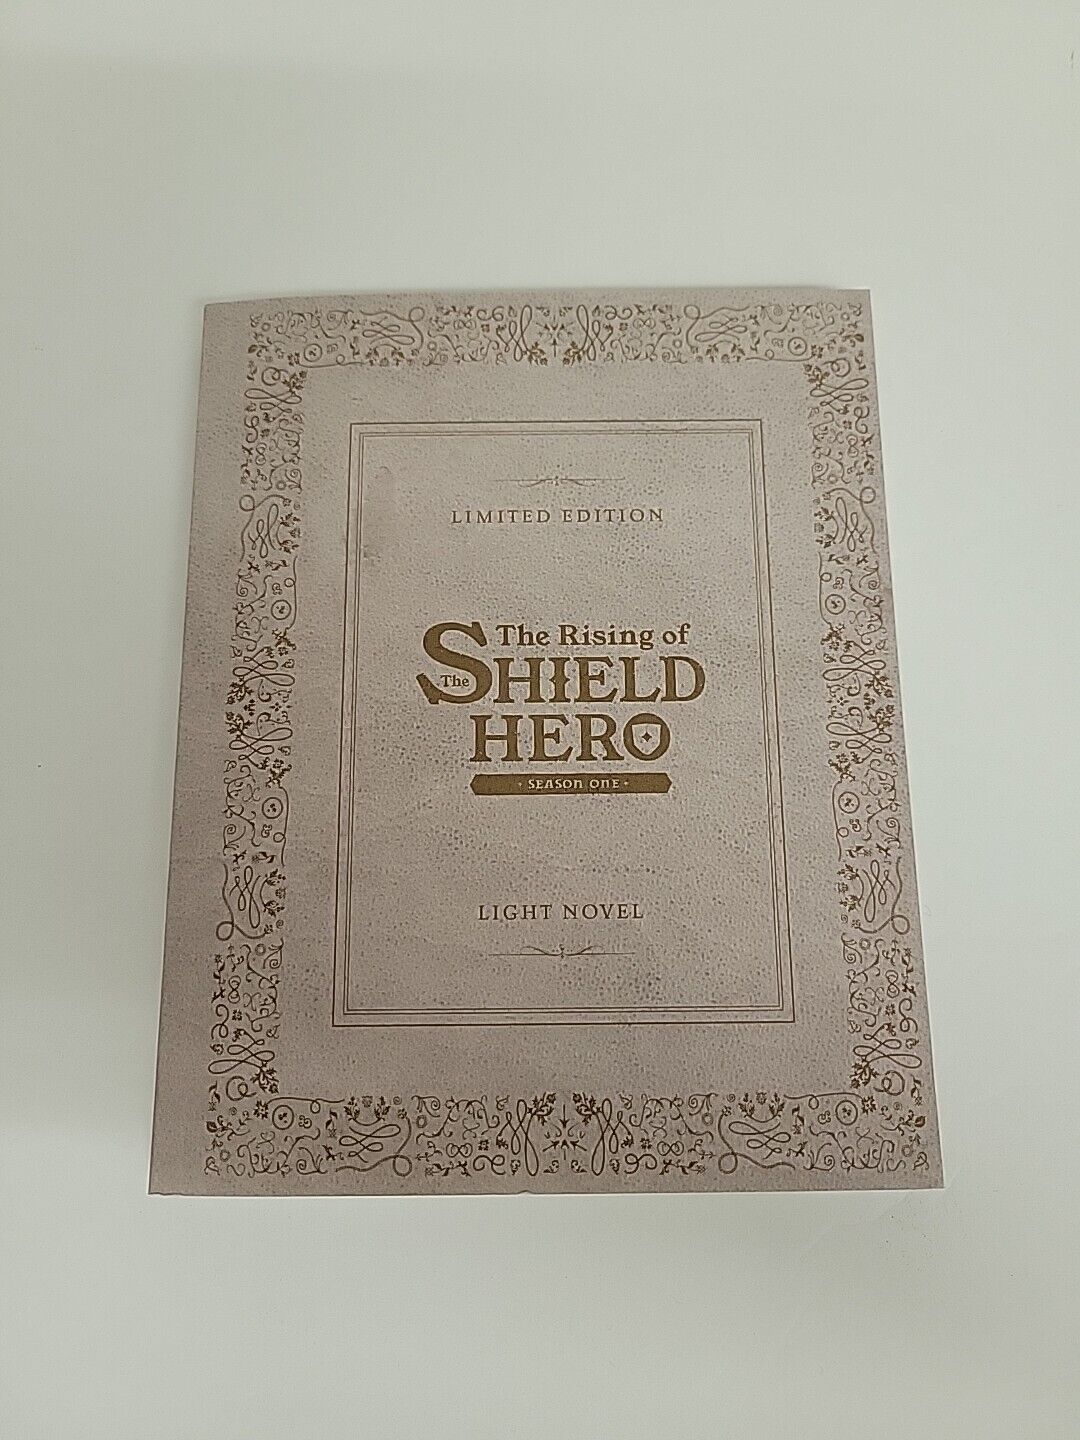 The Rising of the Shield Hero Season 1 One Limited Edition Light Novel Book